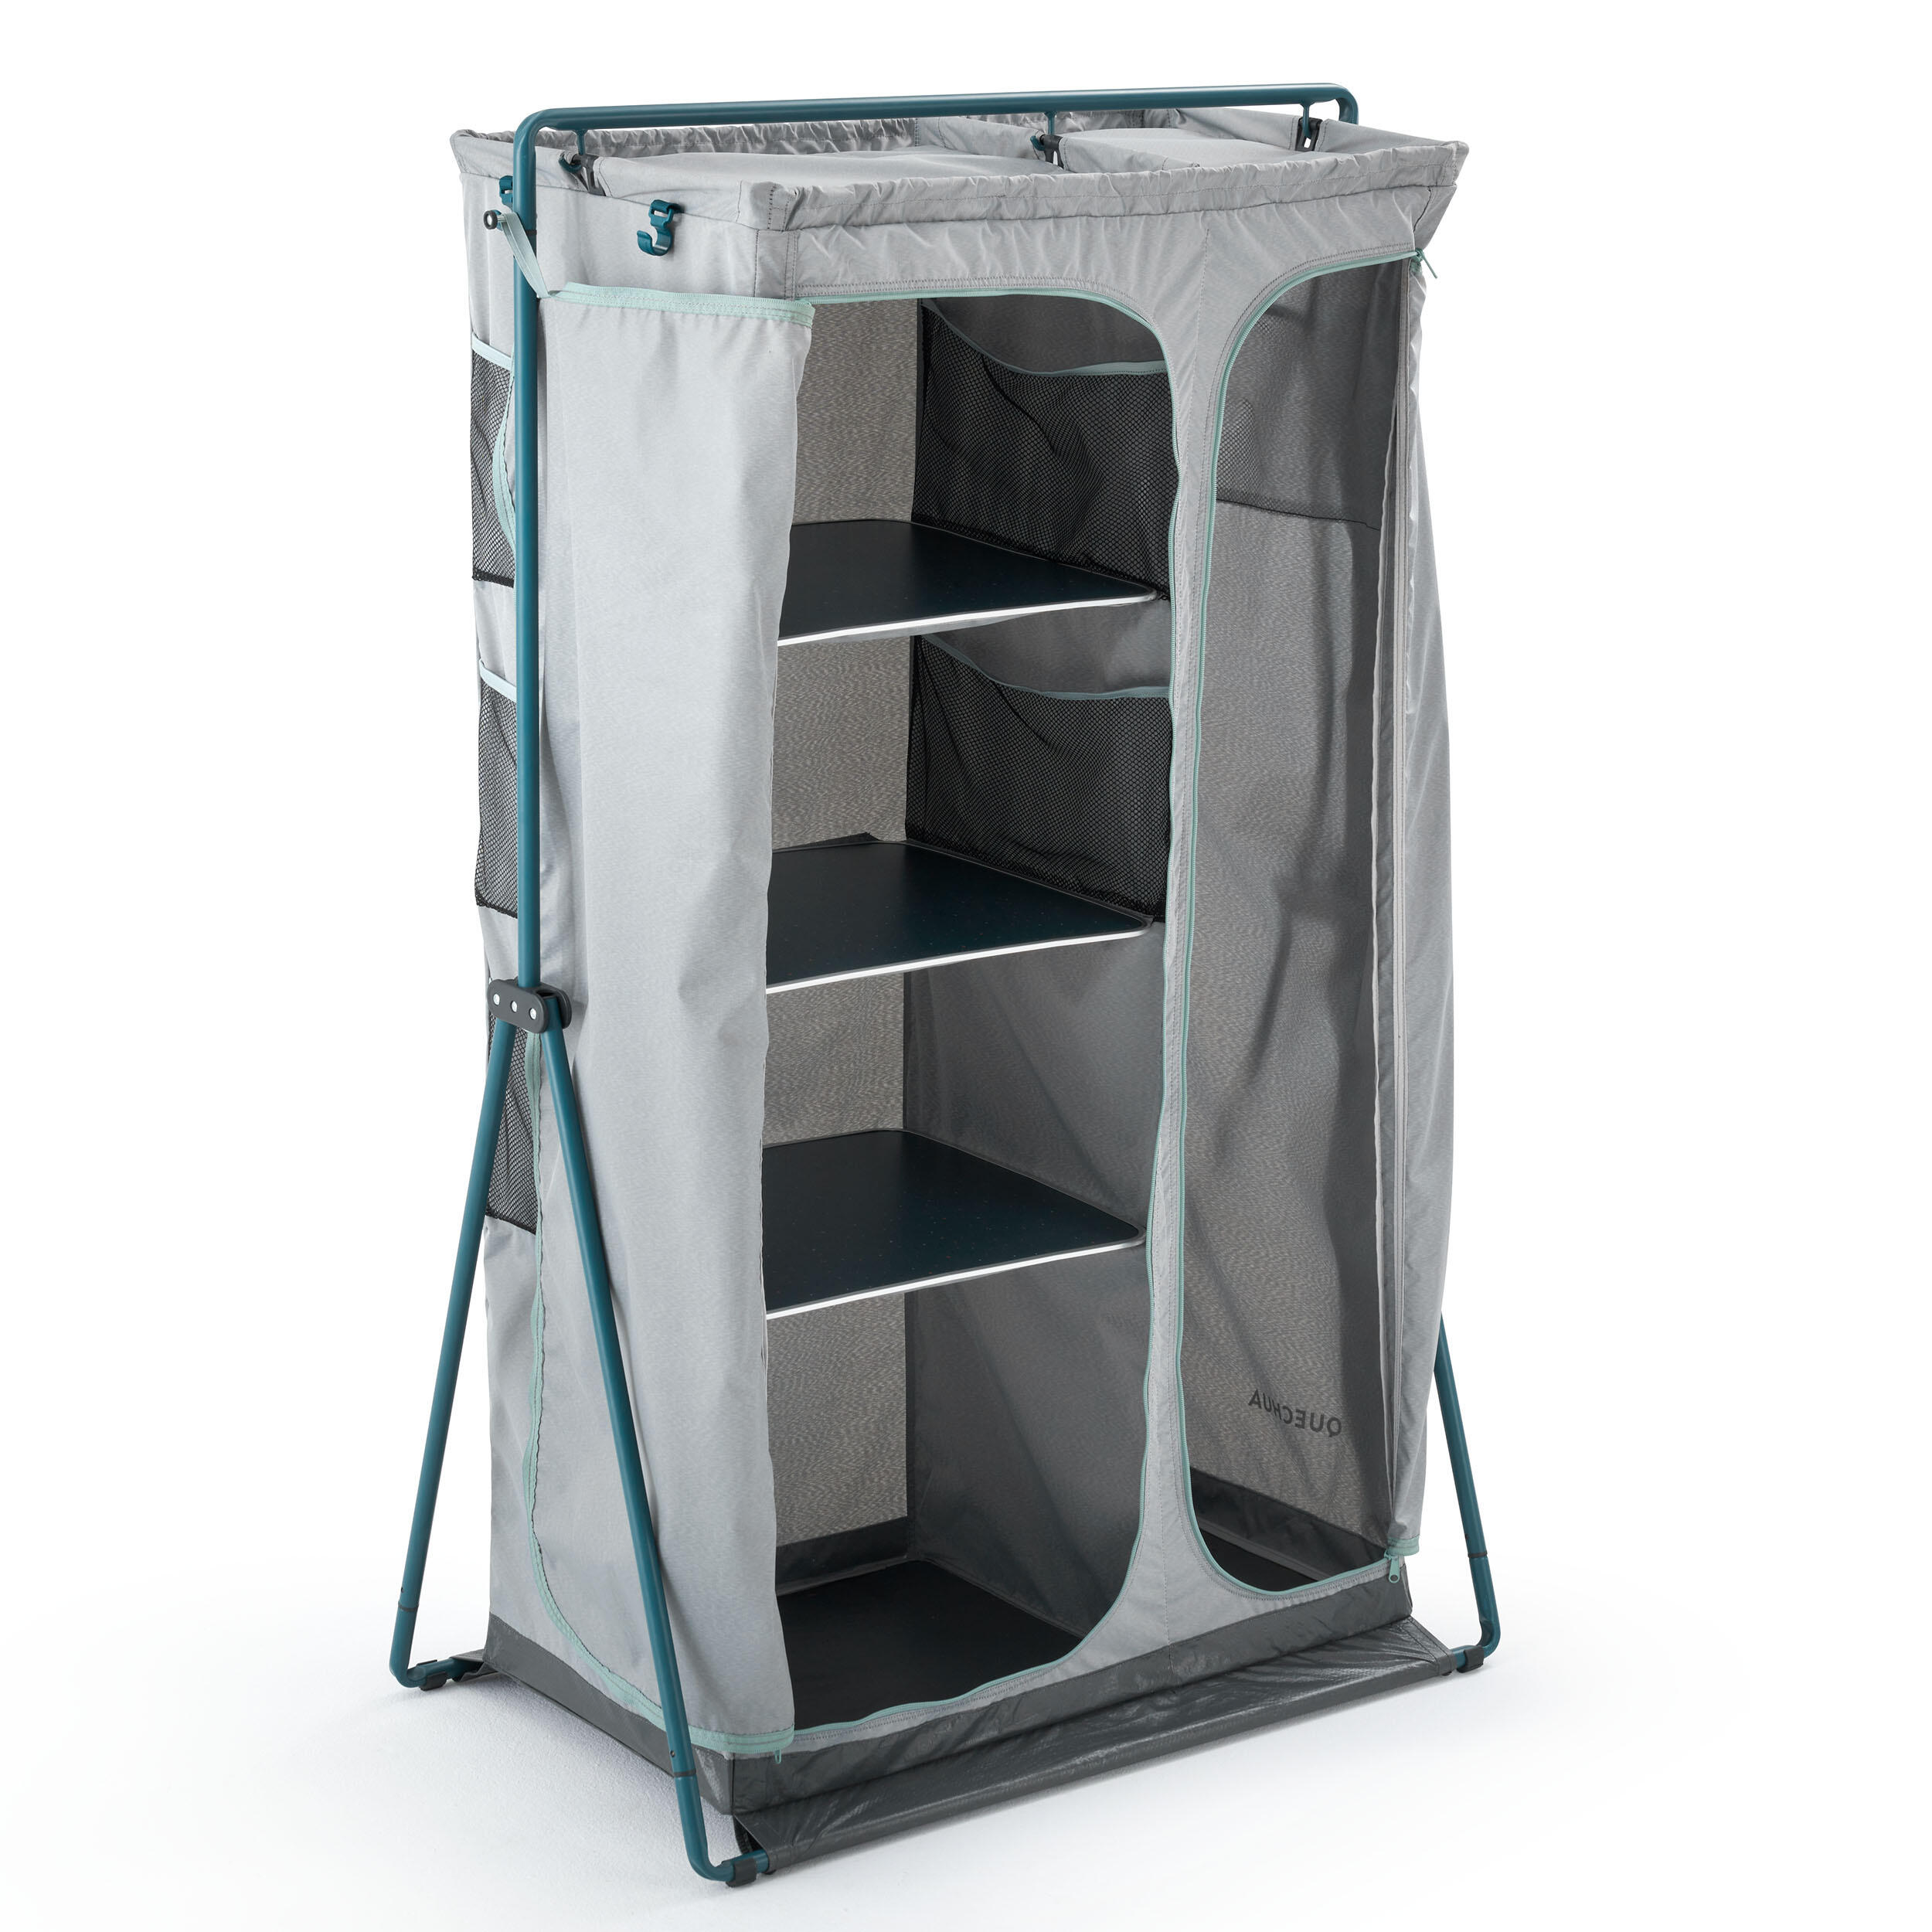 Large folding and compact camping wardrobe - Comfort 1/8